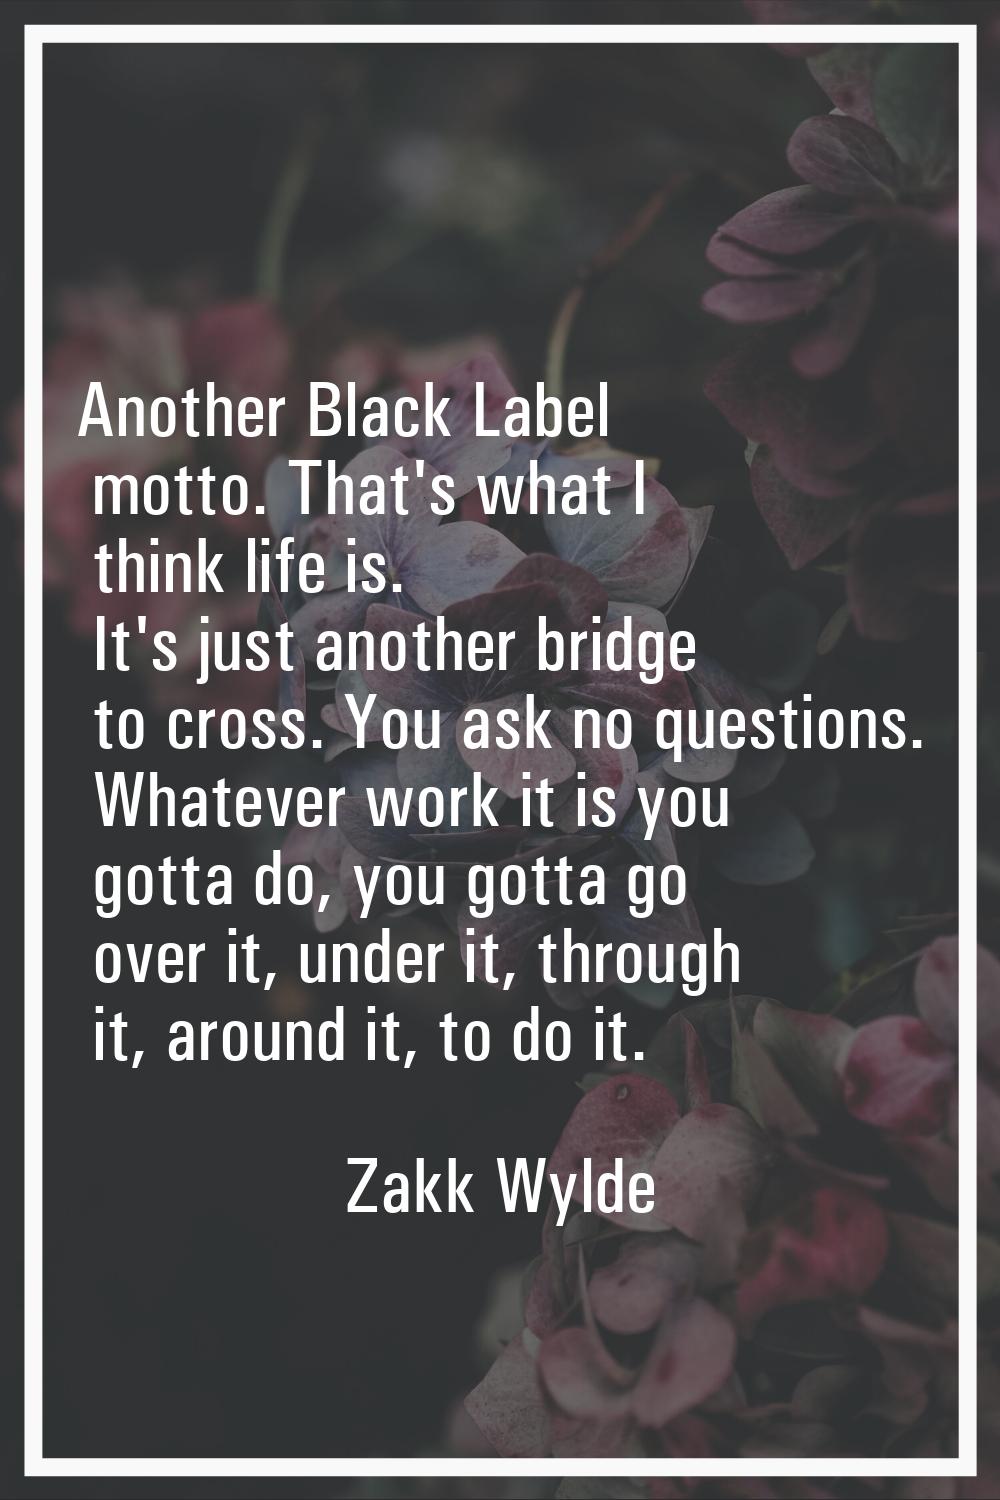 Another Black Label motto. That's what I think life is. It's just another bridge to cross. You ask 